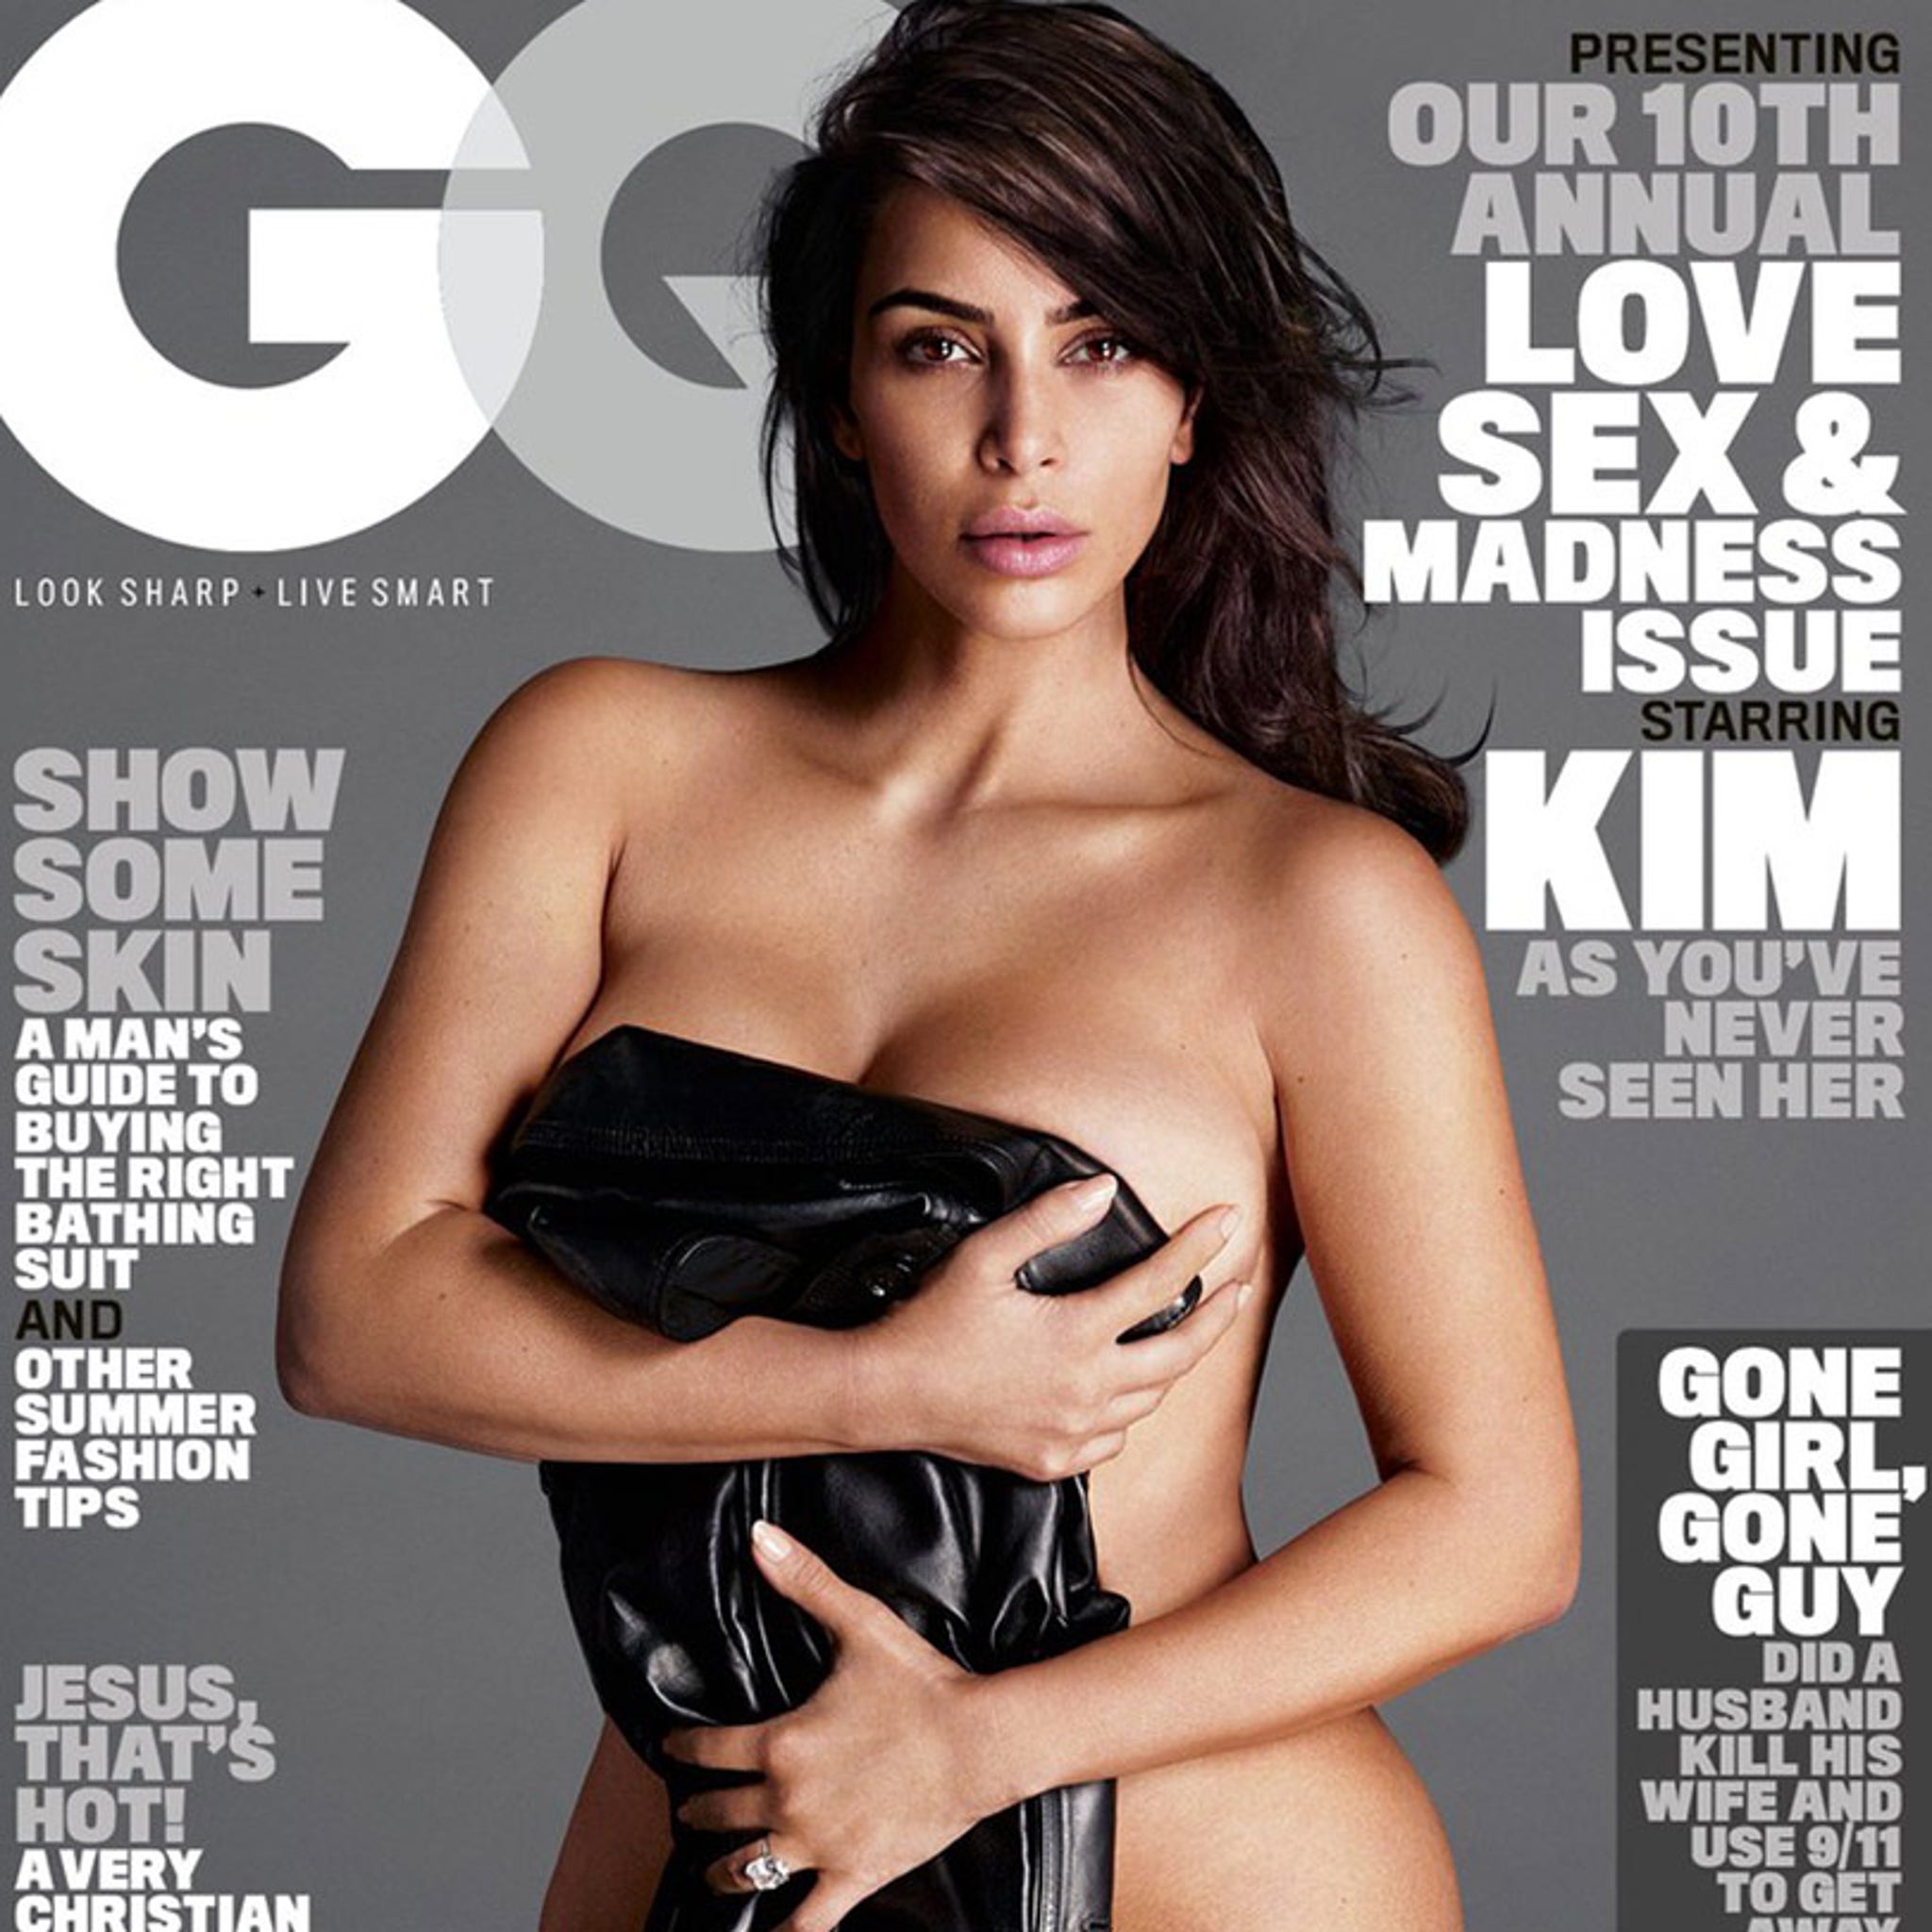 Kim Kardashian Covers GQ Completely Naked After Dropping 60lbs Of Baby Weight! photo